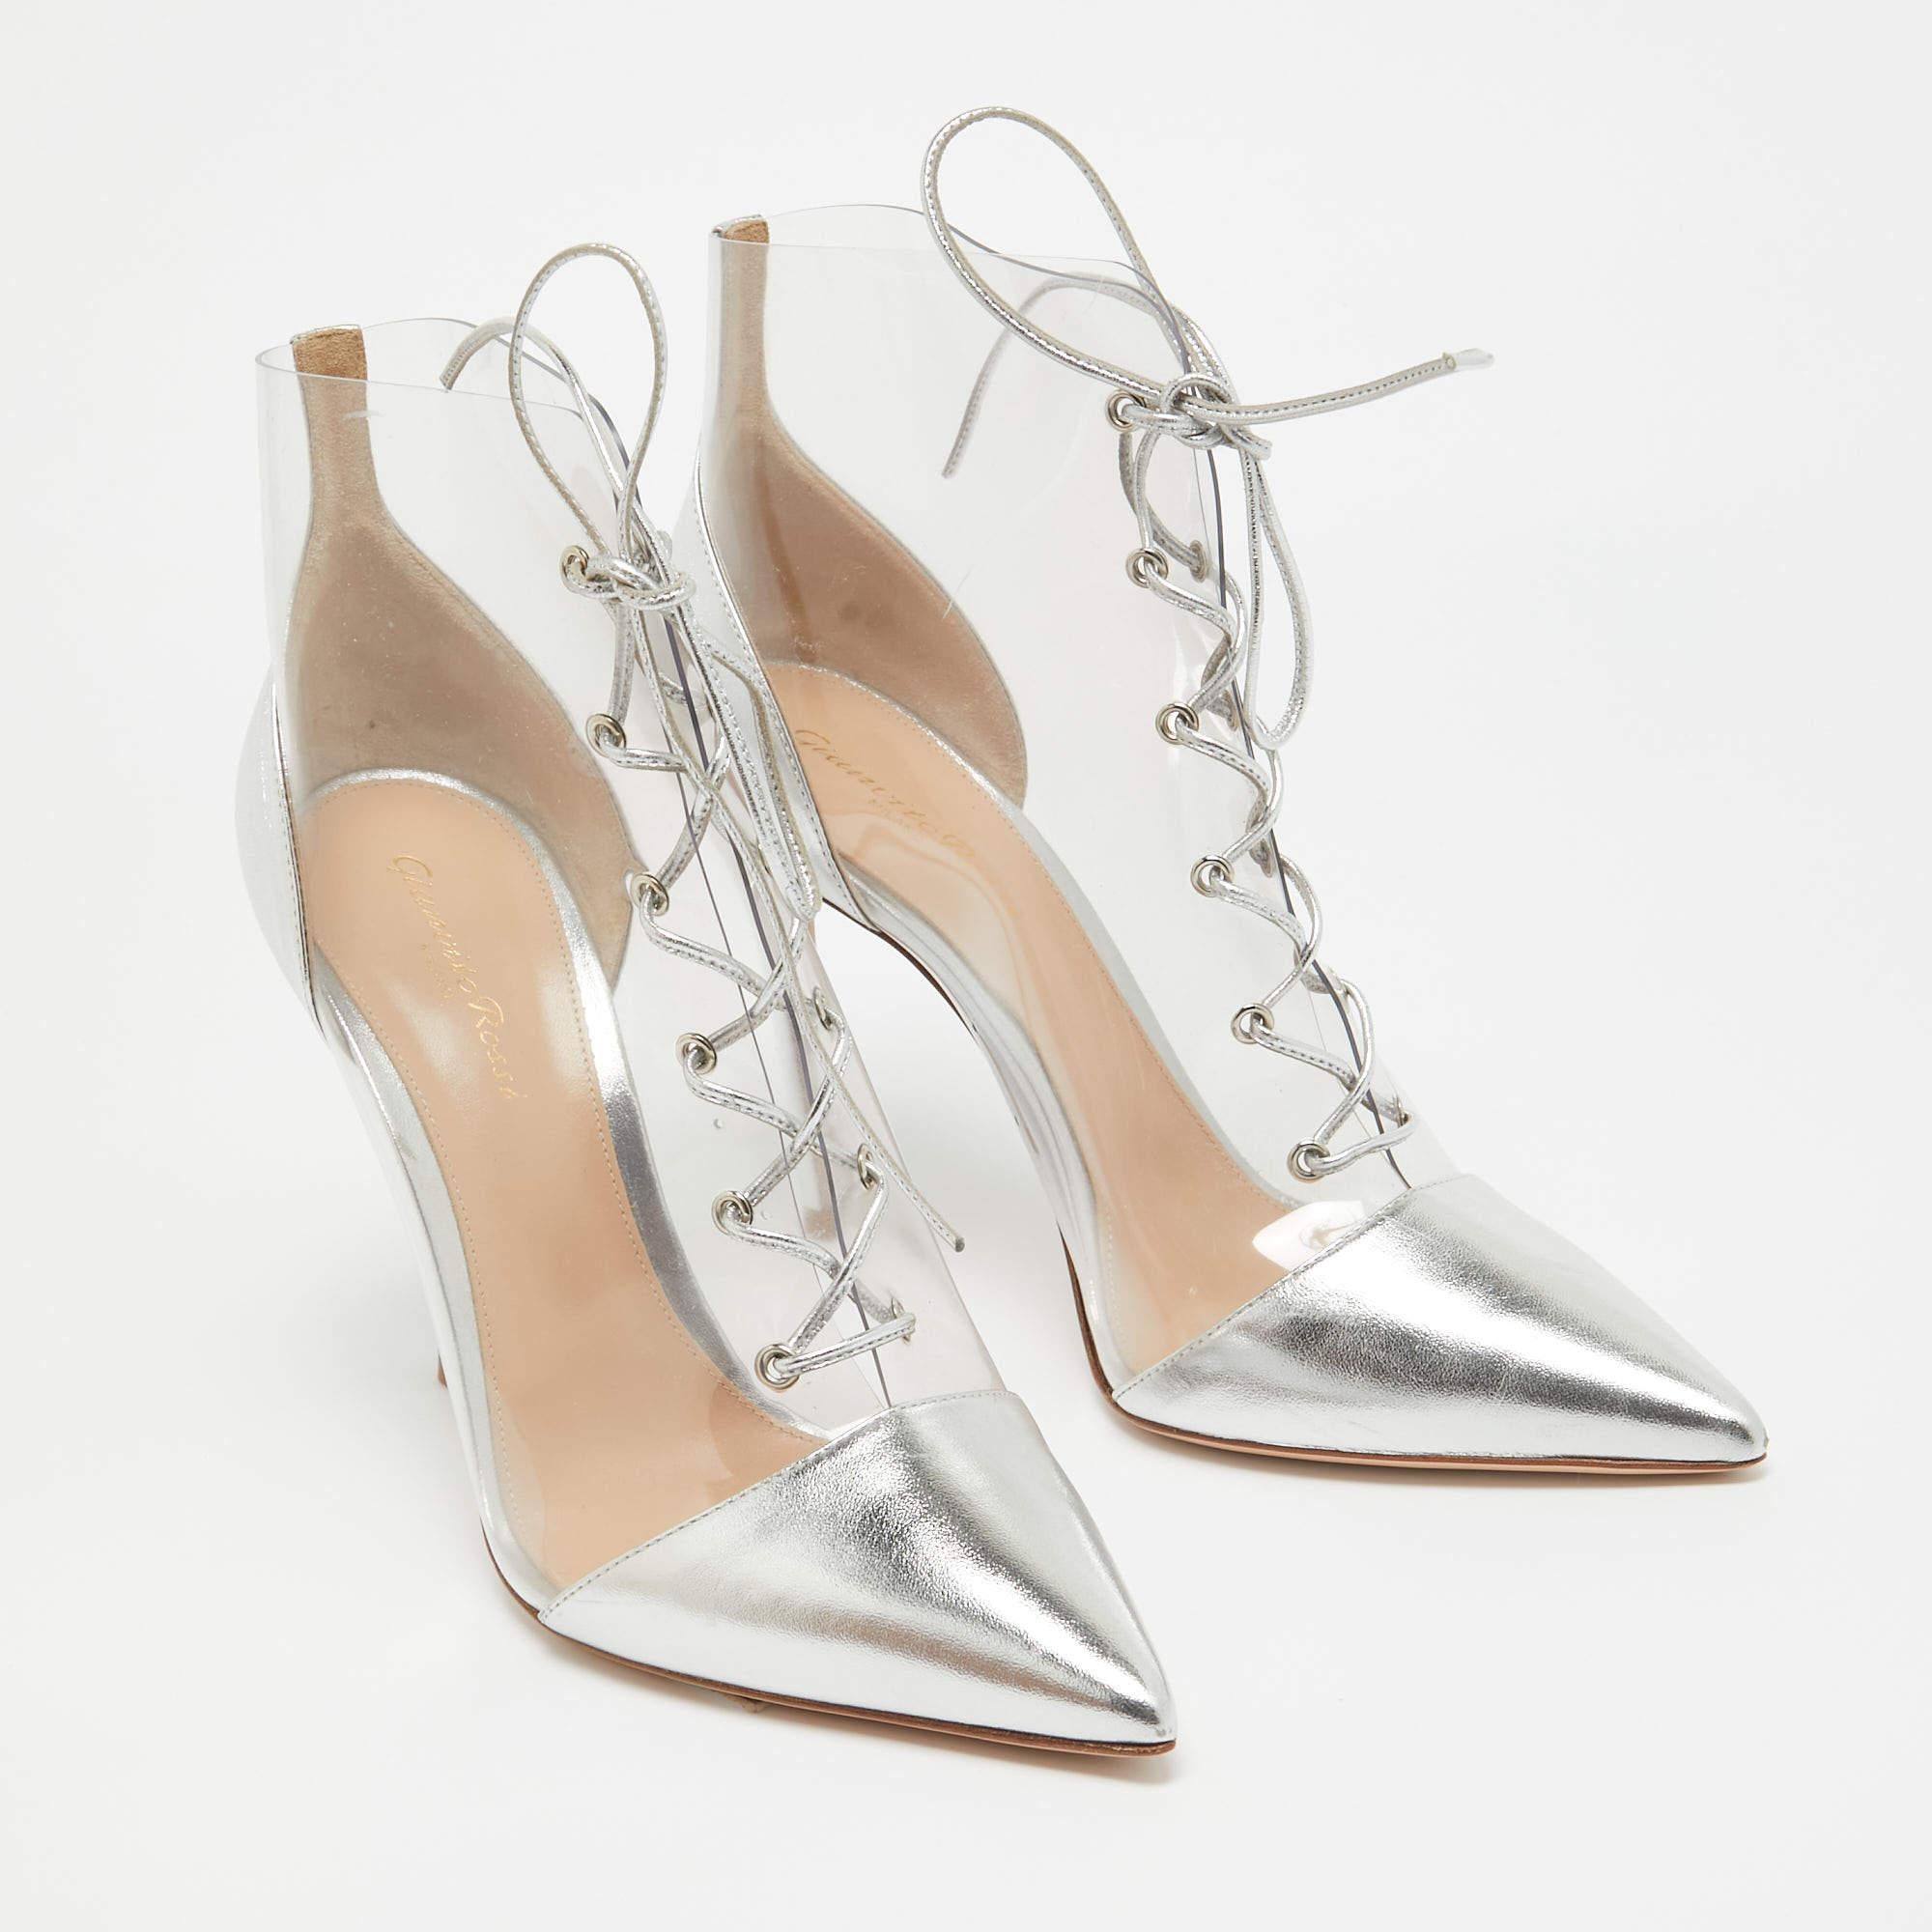 Gianvito Rossi Silver Leather and PVC Icon Ankle Booties Size 40.5 In Excellent Condition For Sale In Dubai, Al Qouz 2